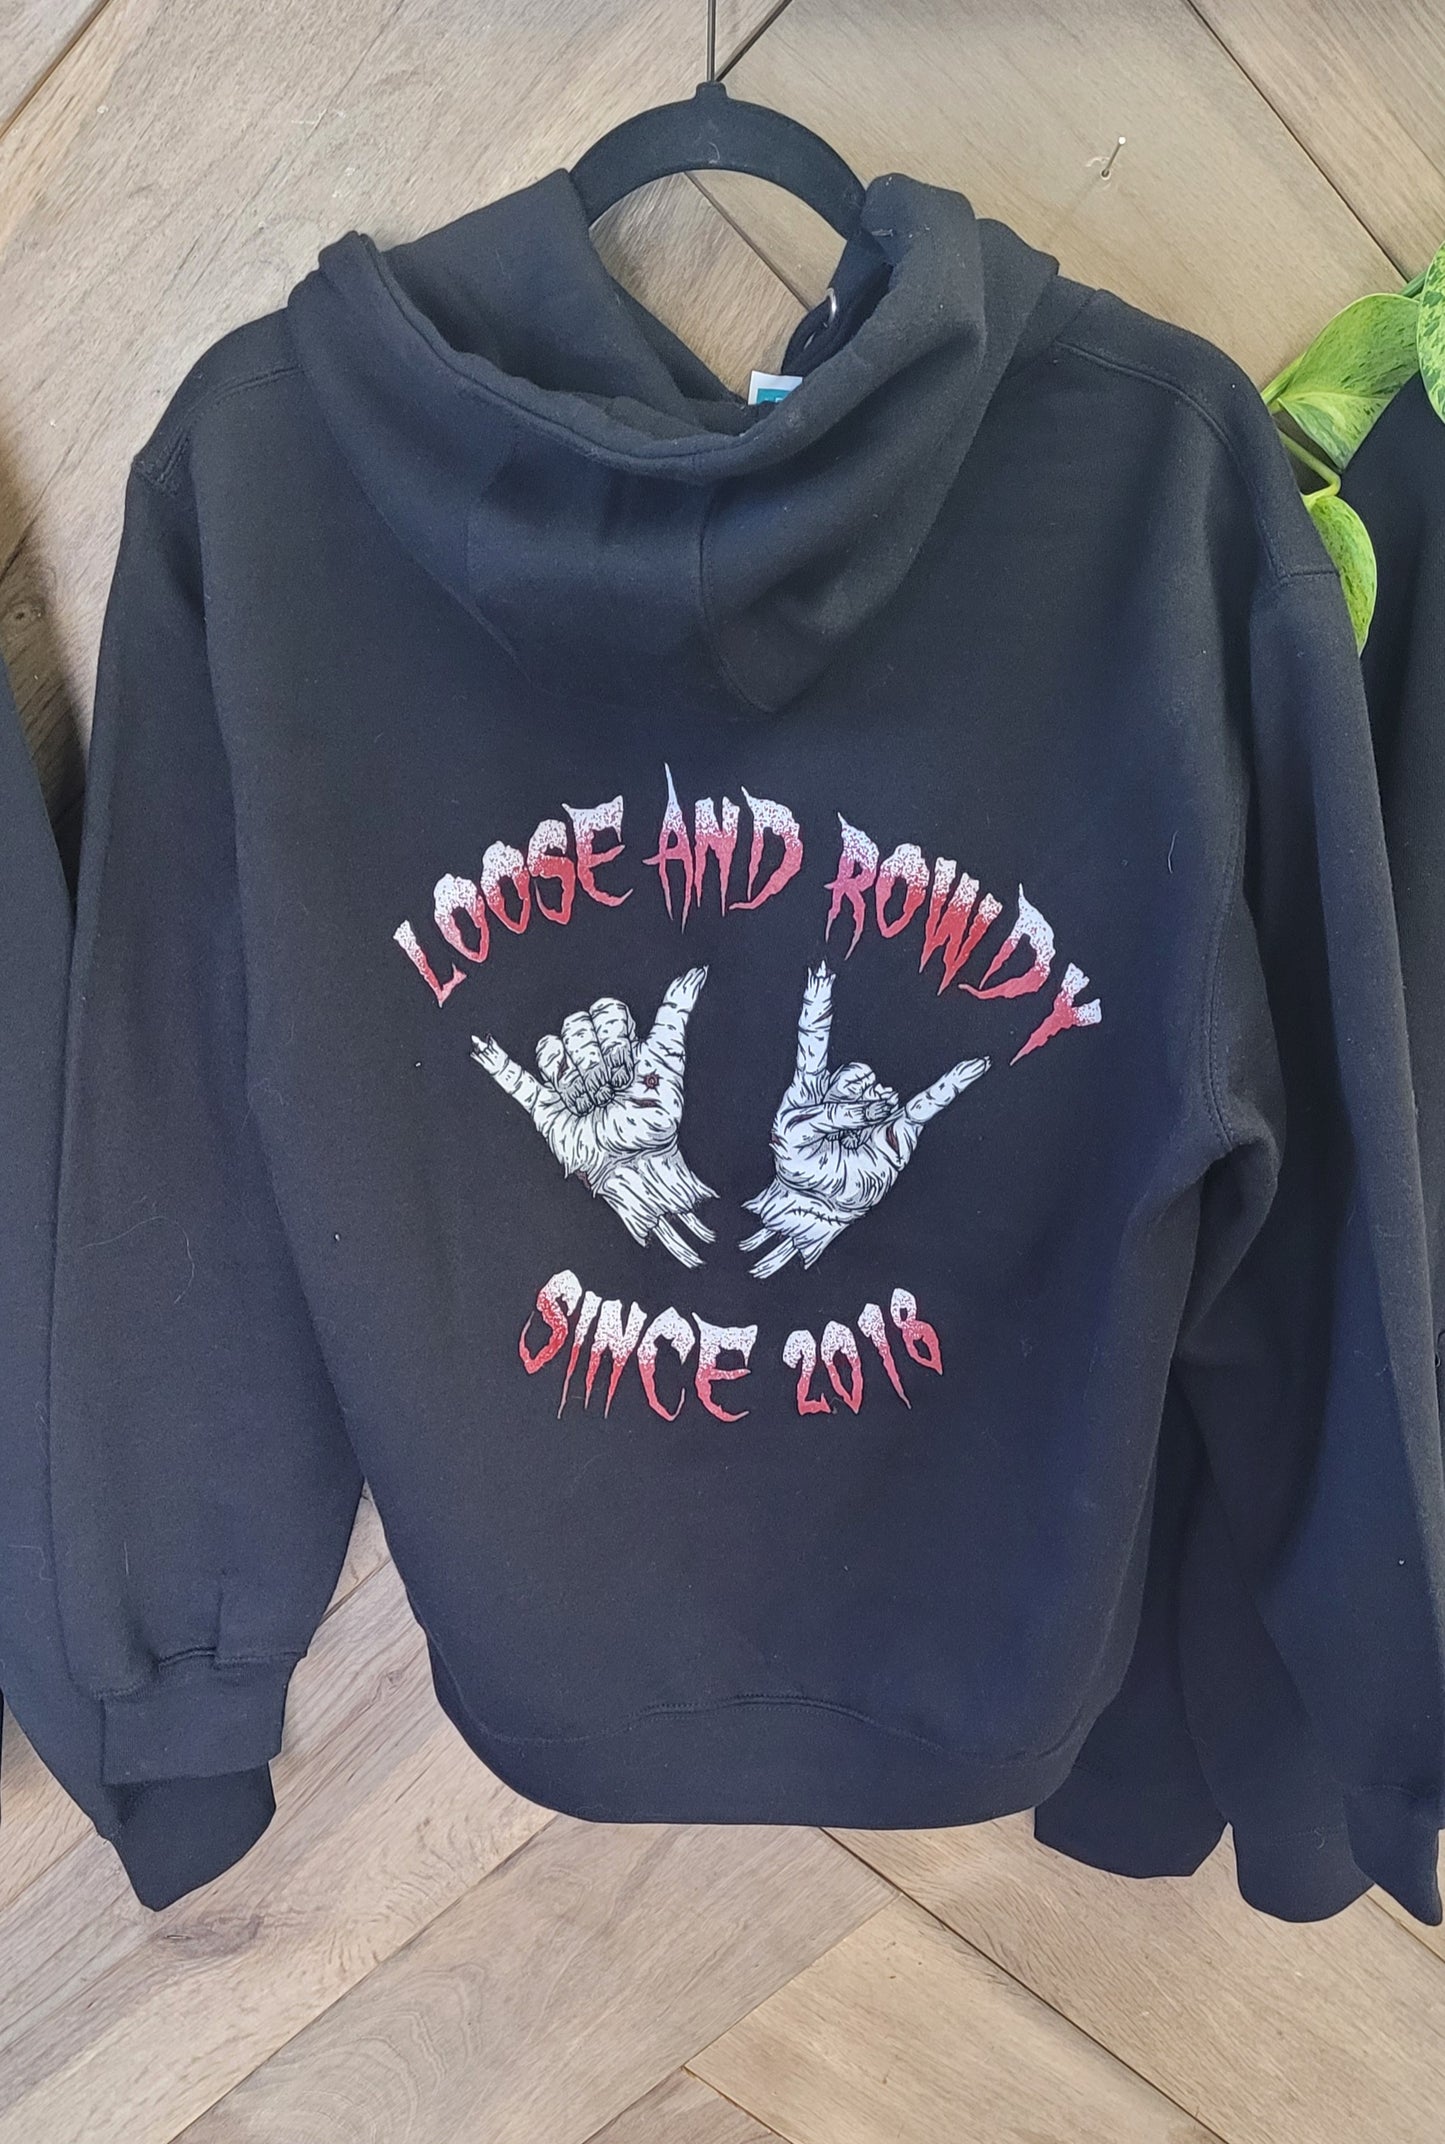 Syndicate Zip Up Hoodies "Loose And Roundy Since 2017"